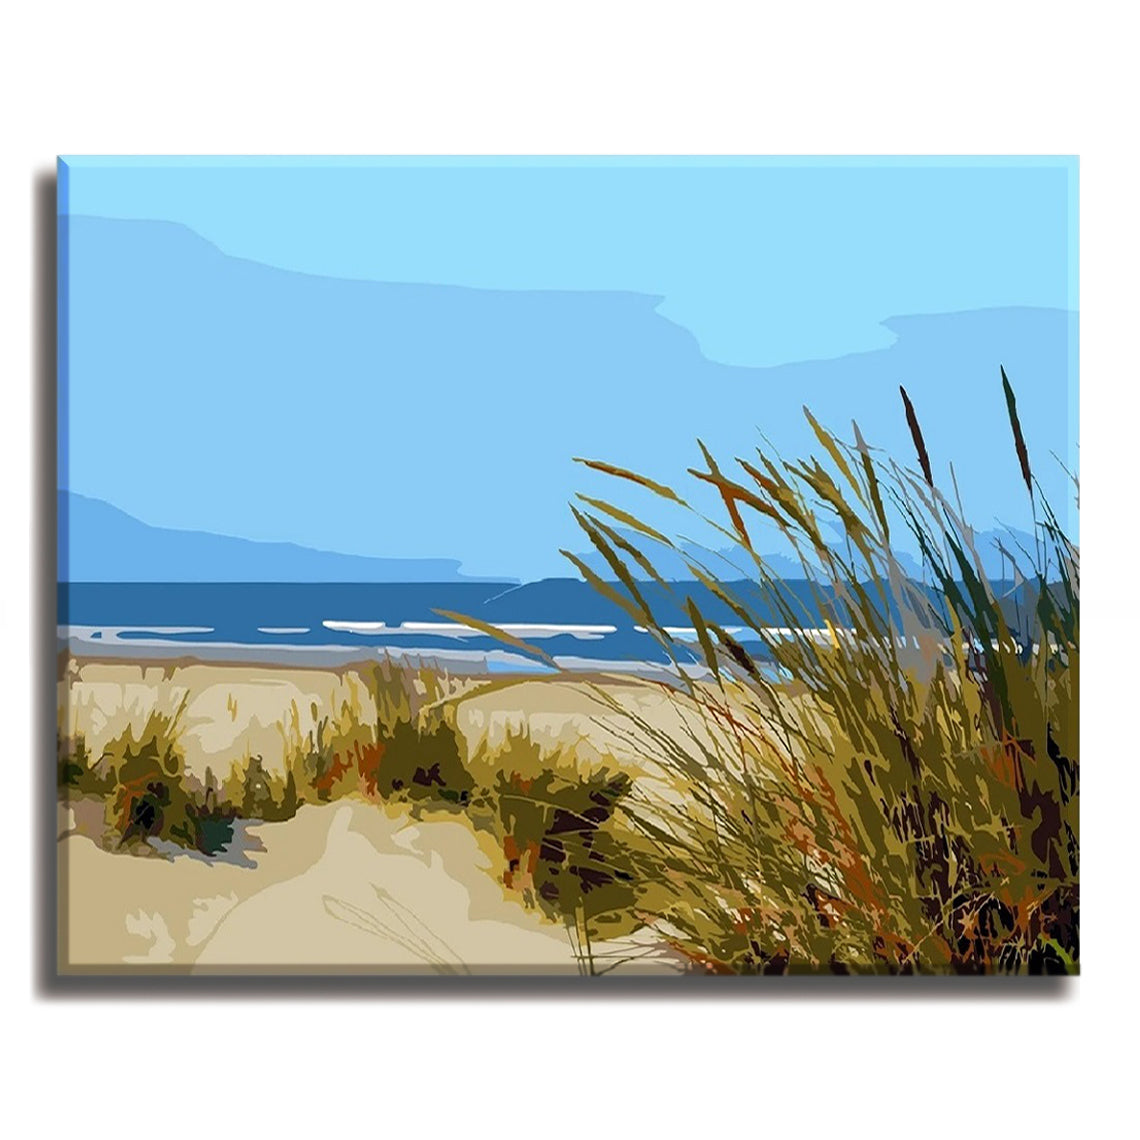 Beach Grass - Paint by Number Kit DIY Oil Painting on Wood Stretched Canvas 16"x20"